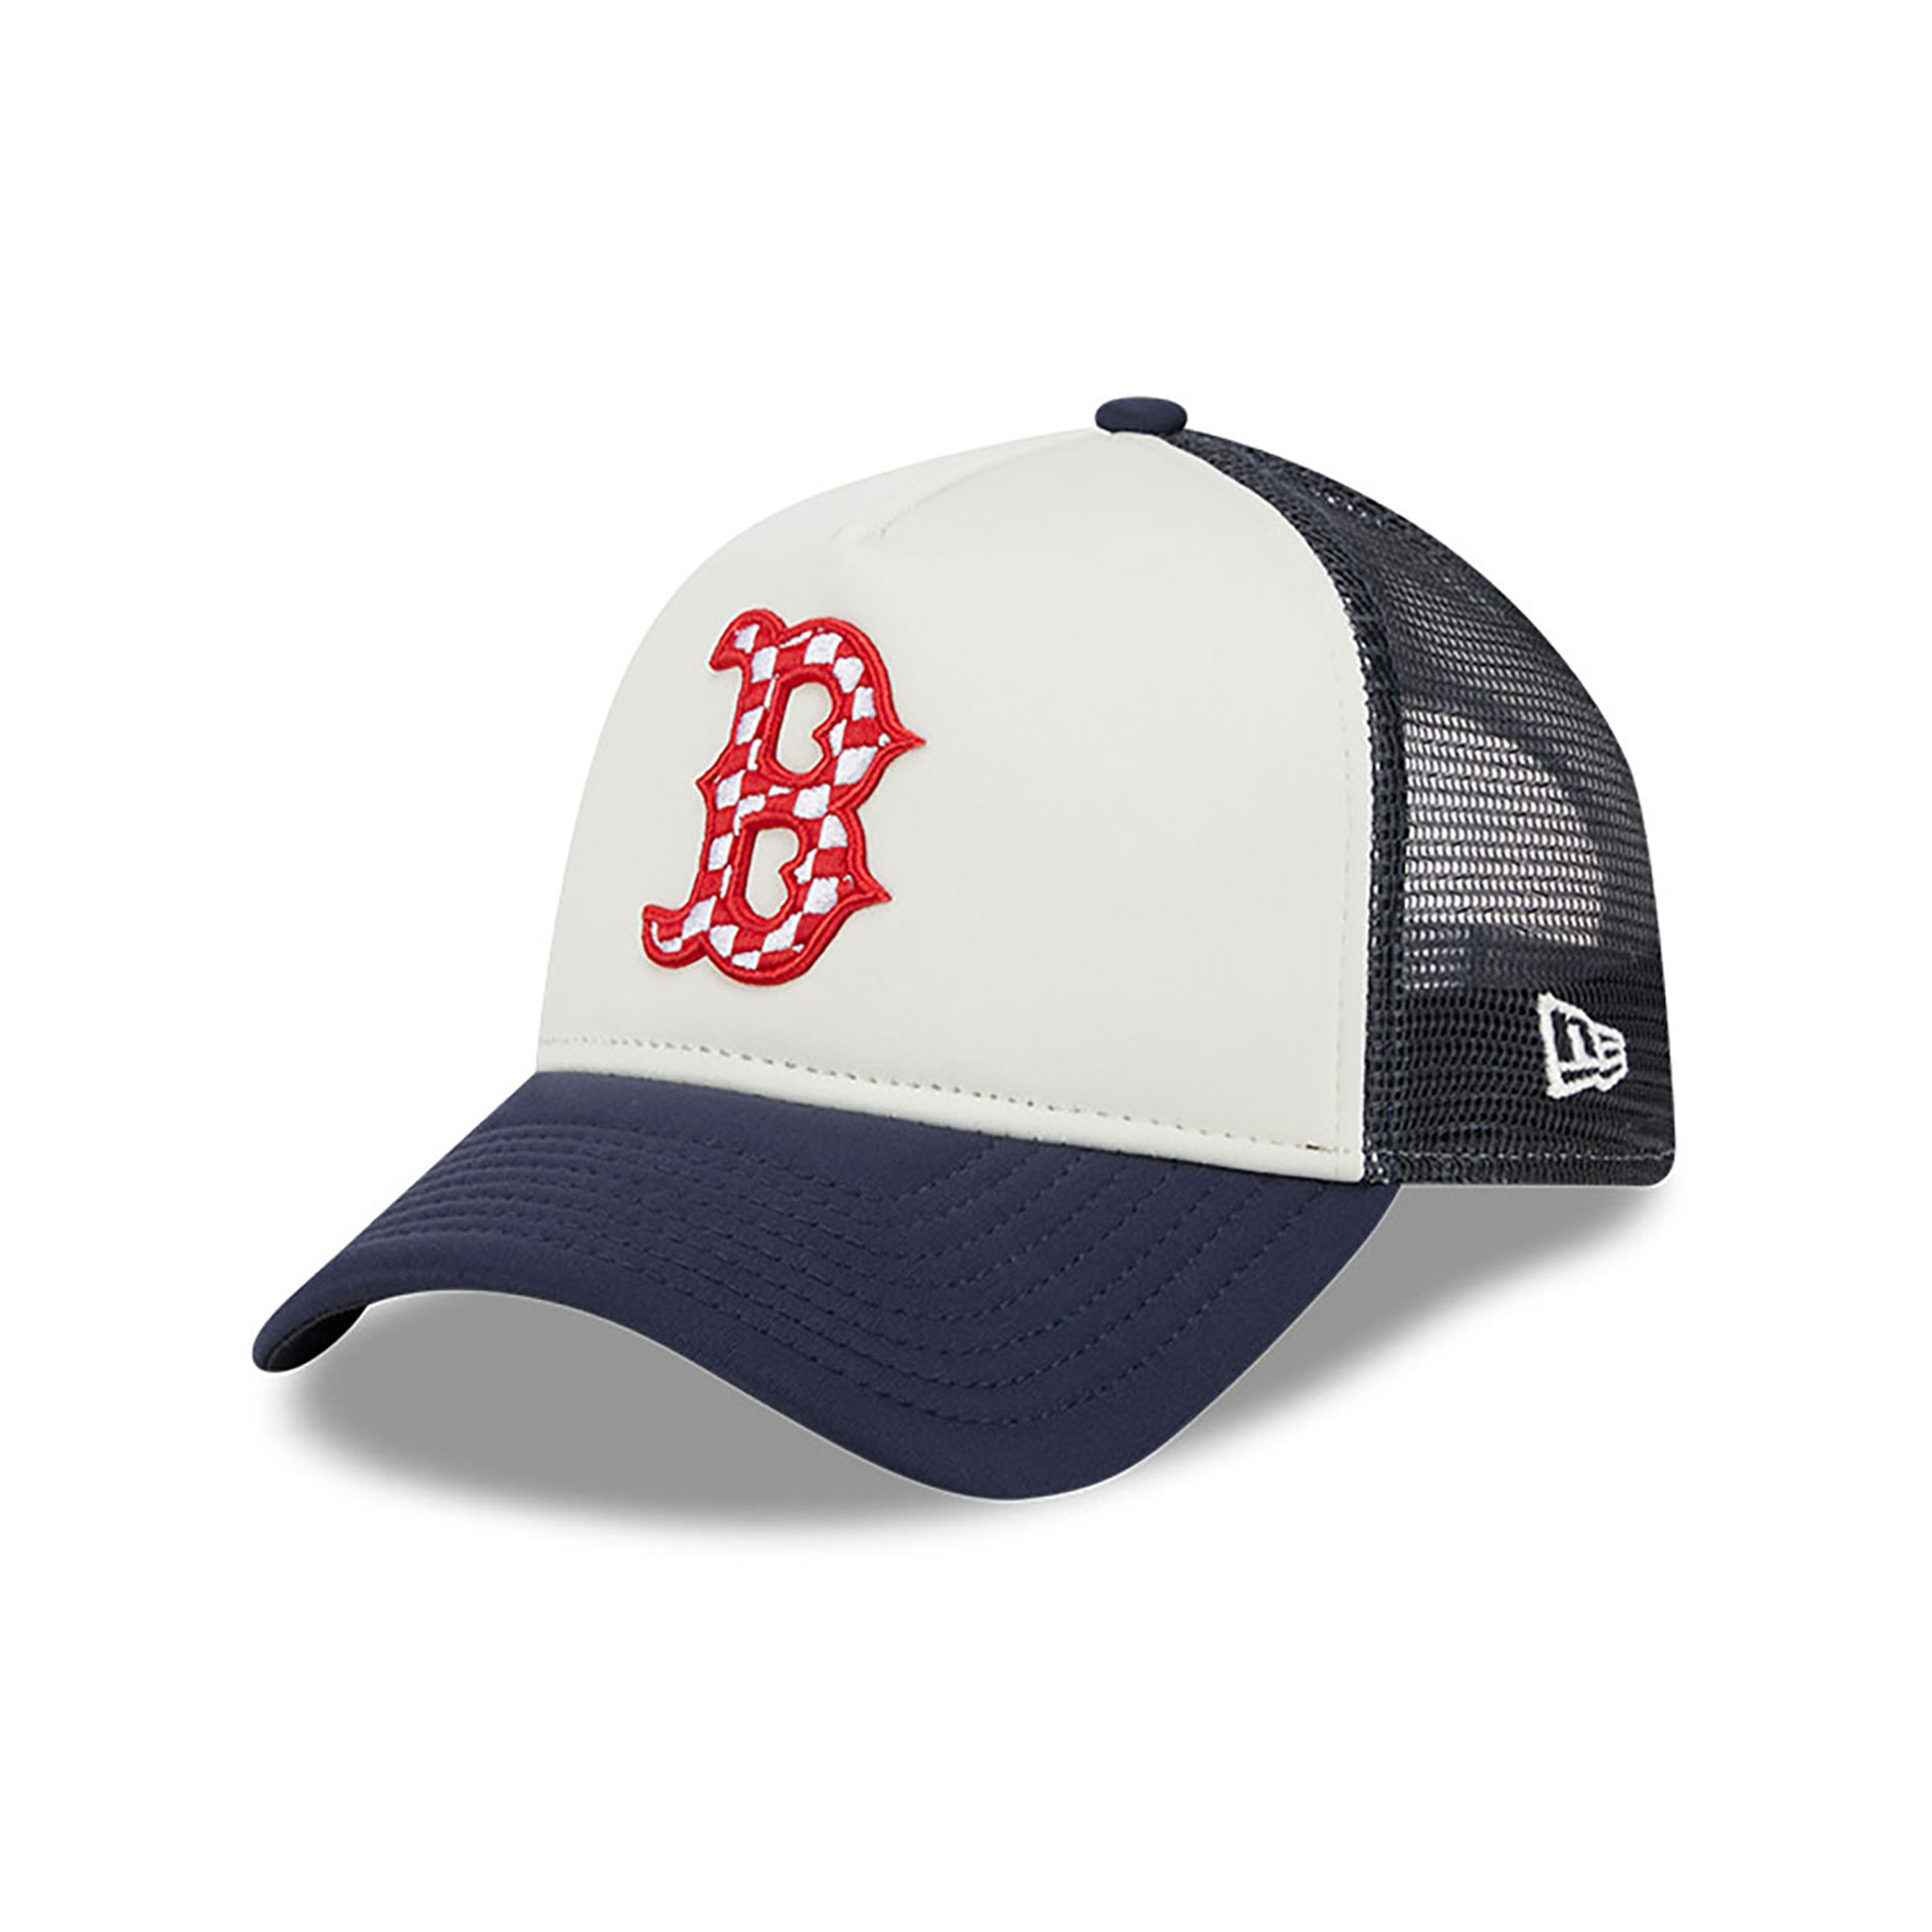 Boston Red Sox Check Flag Navy 9FORTY A-Frame Adjustable Trucker Cap